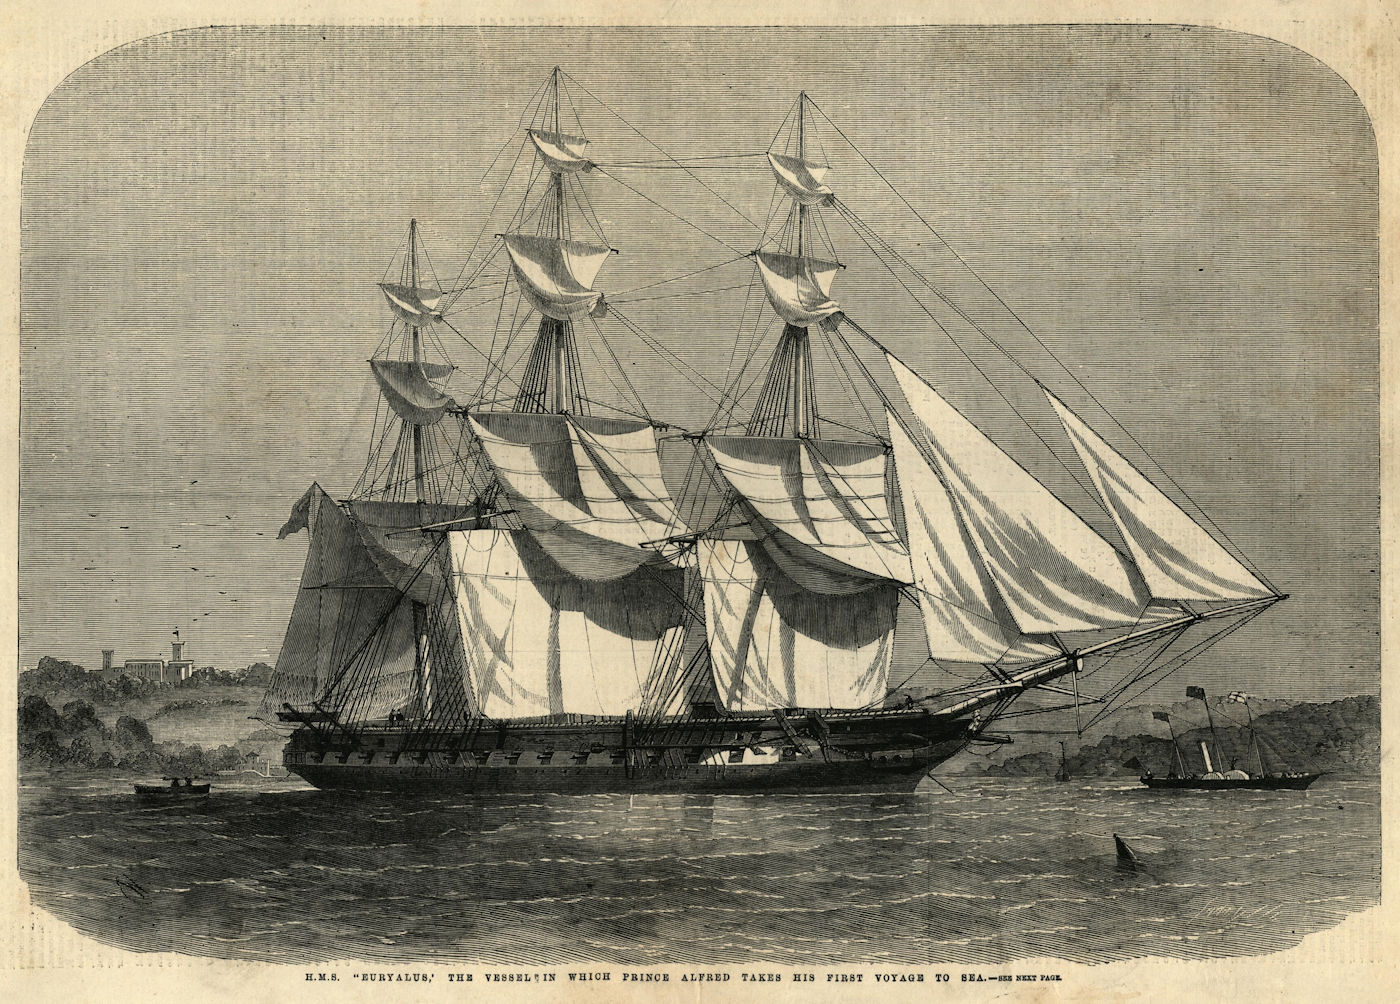 Associate Product HMS Euryalus, the ship in which Prince Alfred took his first voyage to sea 1858